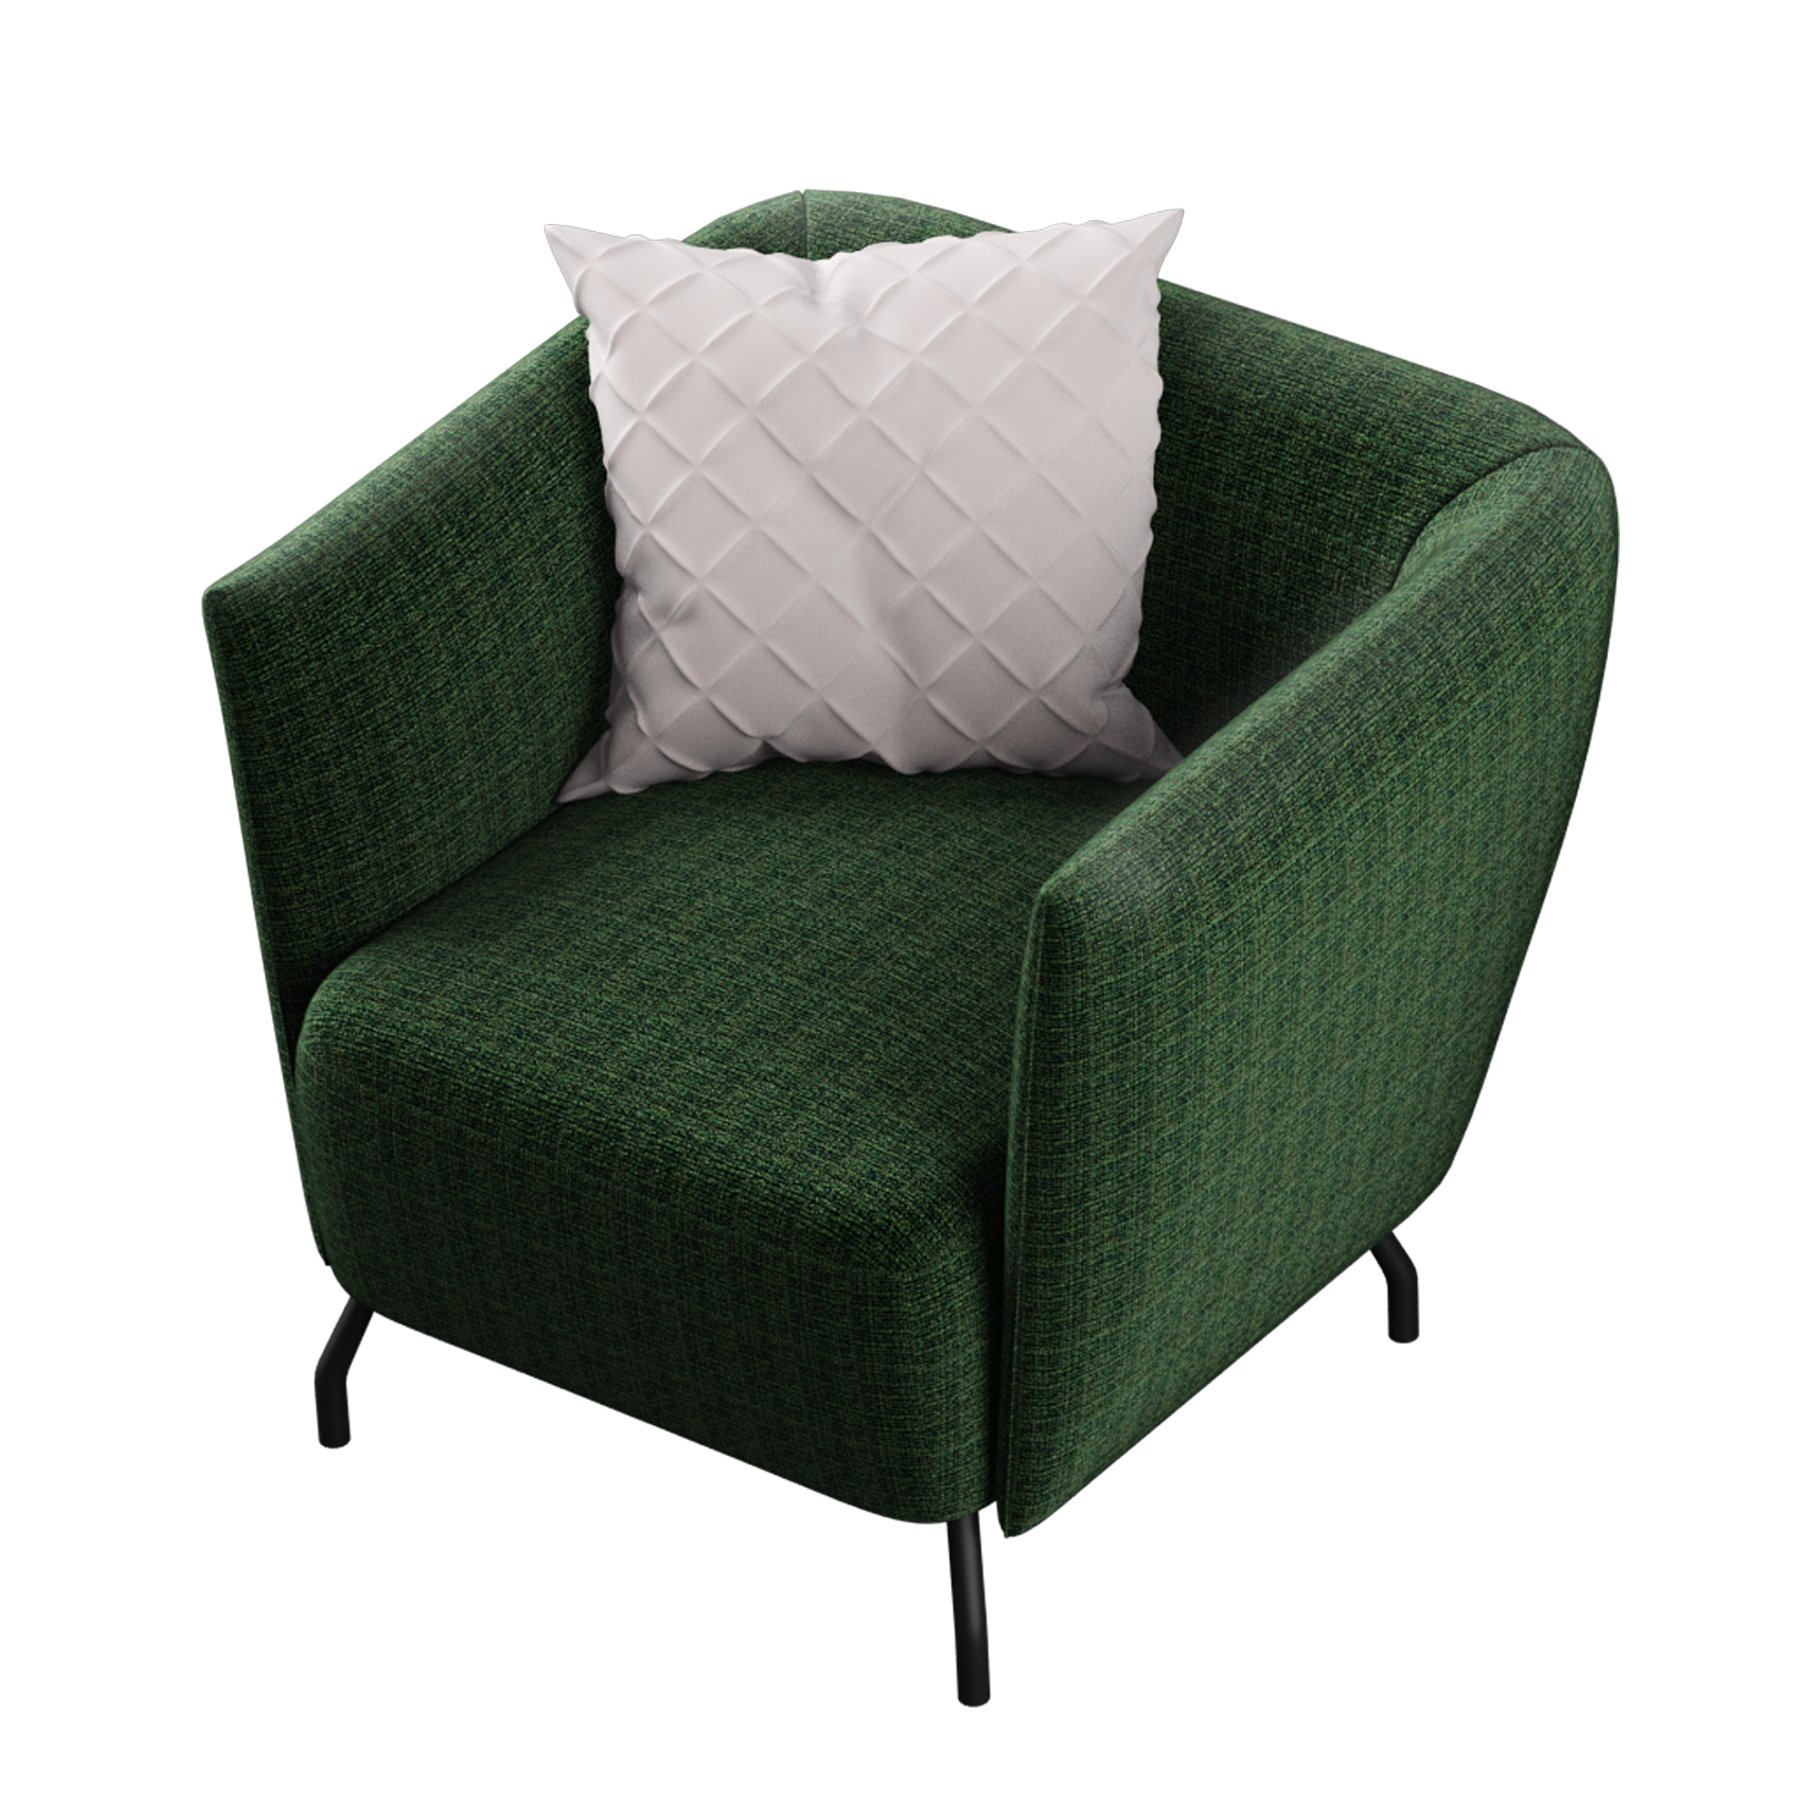 Rendering of a unique 3d model of a green armchair